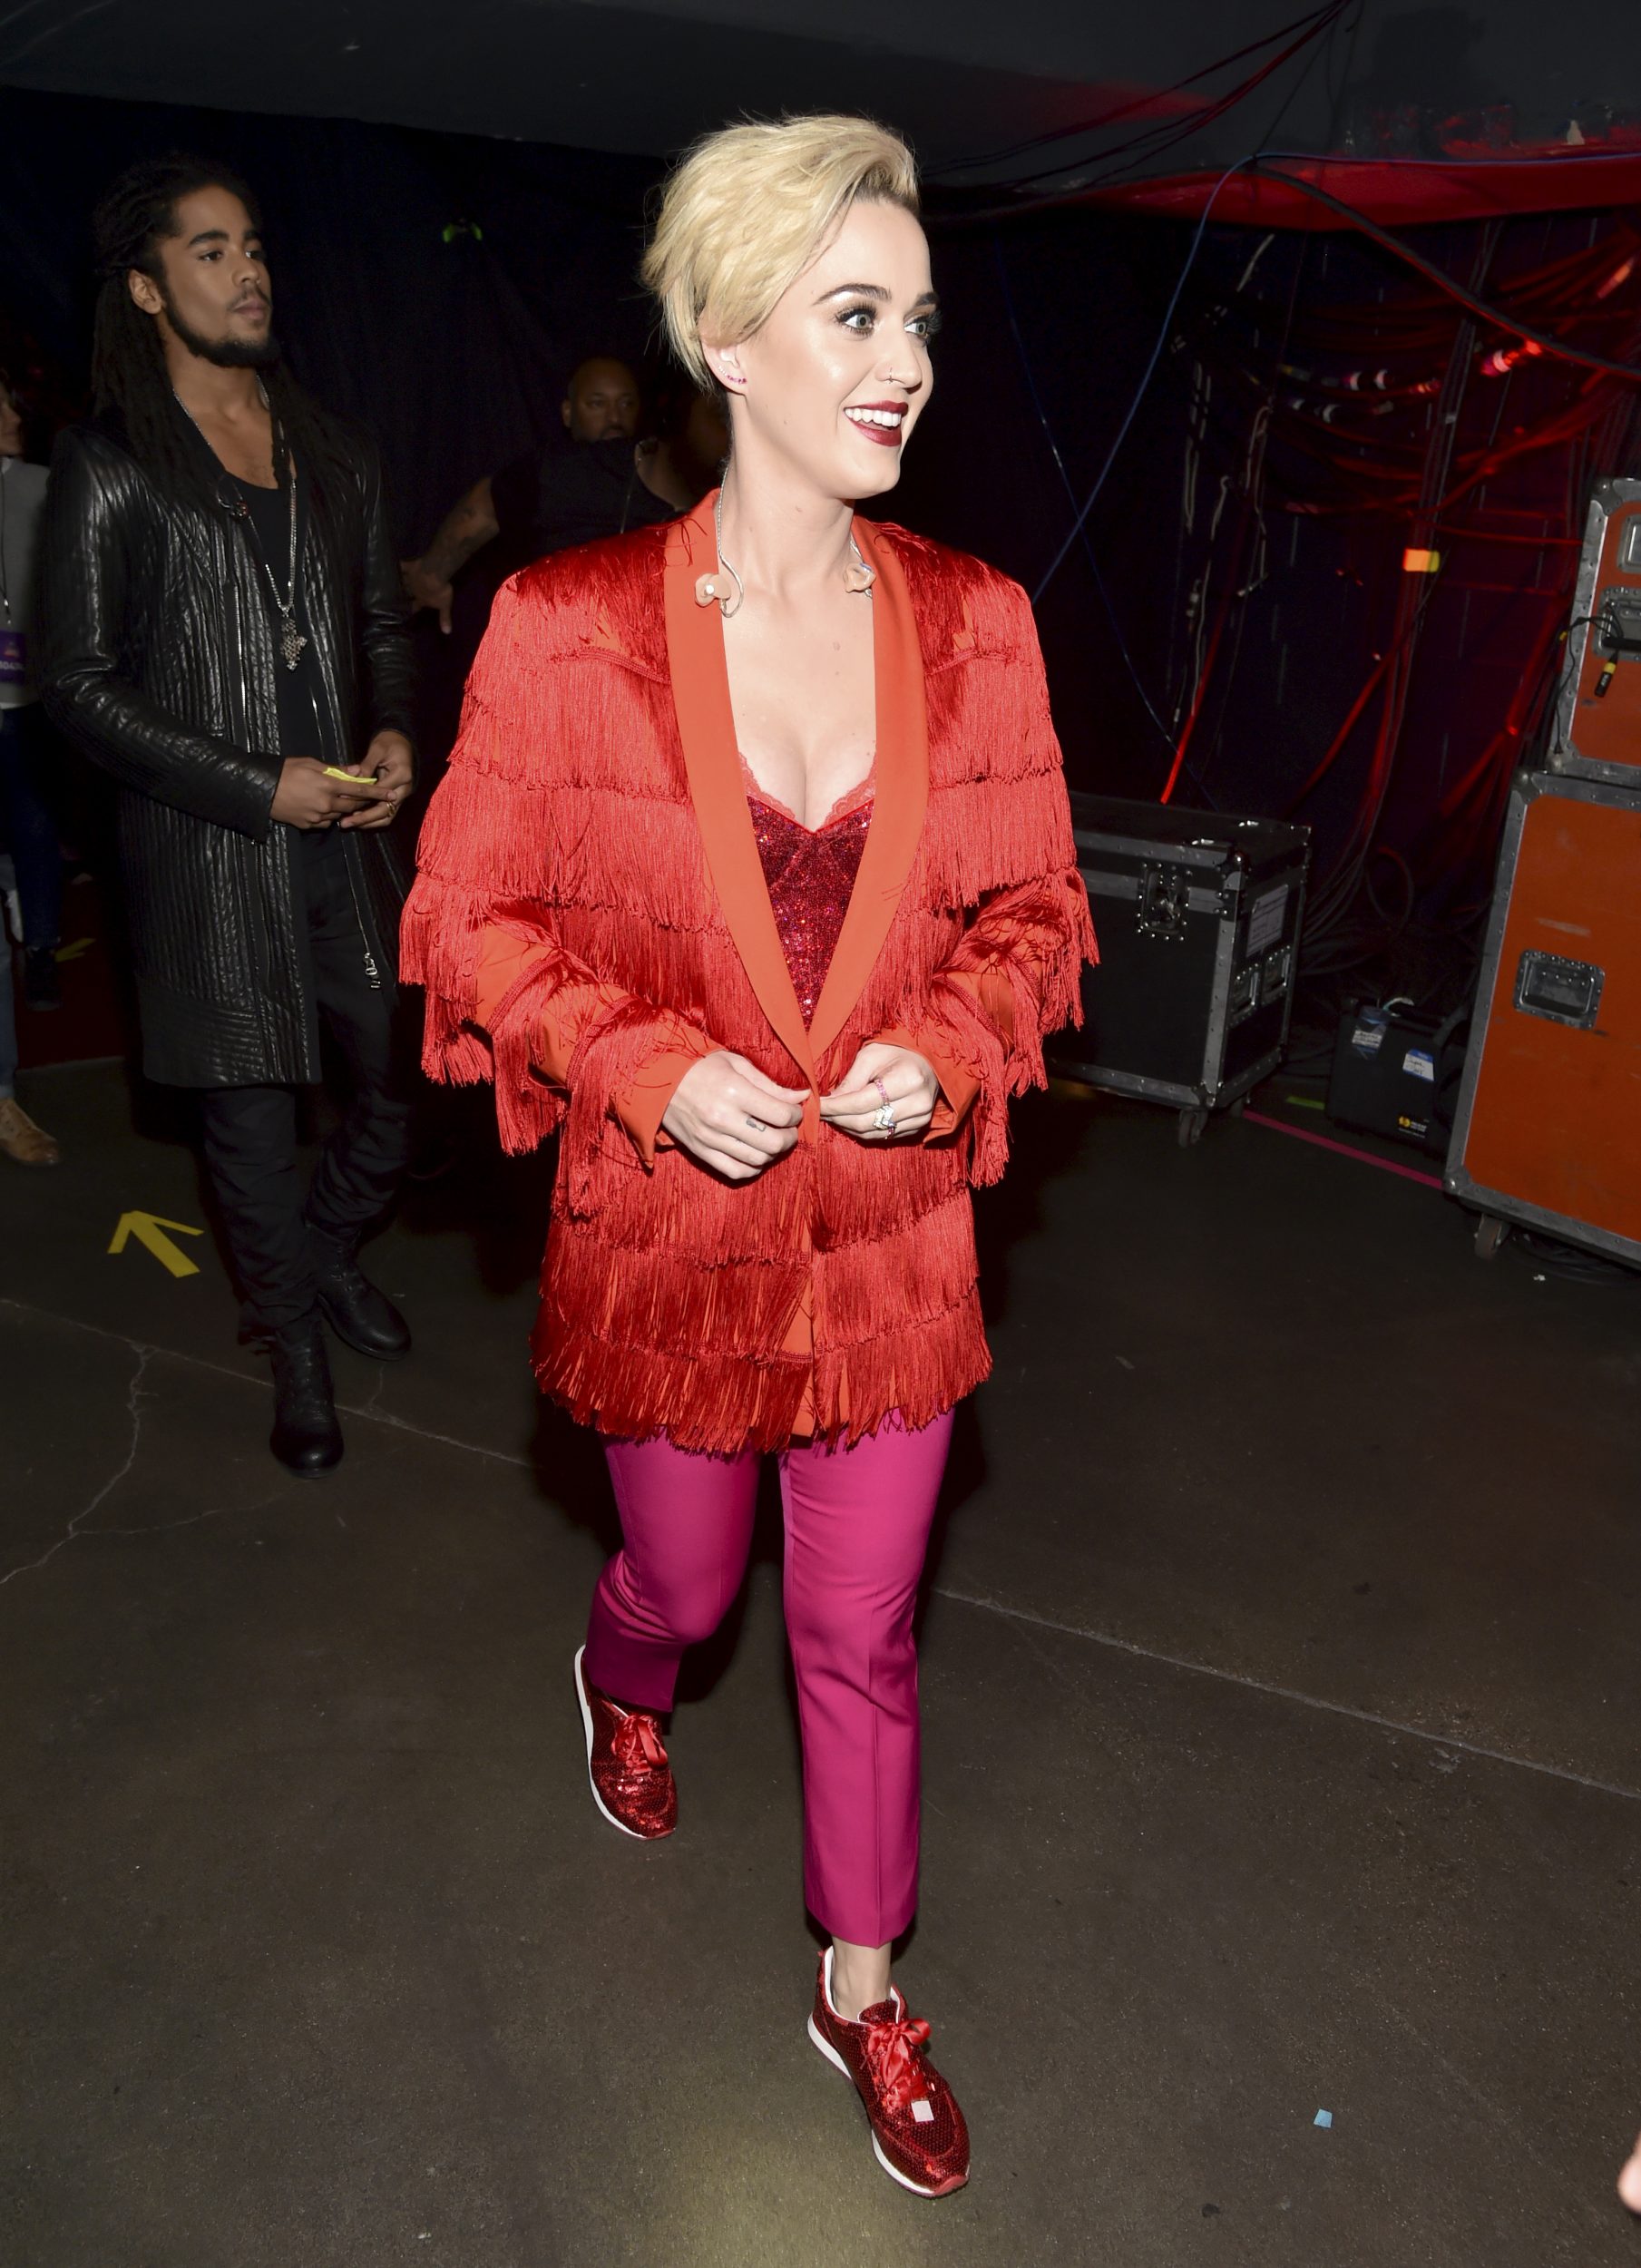 INGLEWOOD, CA - MARCH 05: Singer Katy Perry seen backstage at the 2017 iHeartRadio Music Awards which broadcast live on Turner's TBS, TNT, and truTV at The Forum on March 5, 2017 in Inglewood, California. (Photo by Frazer Harrison/Getty Images for iHeartMedia) *** Local Caption *** Katy Perry